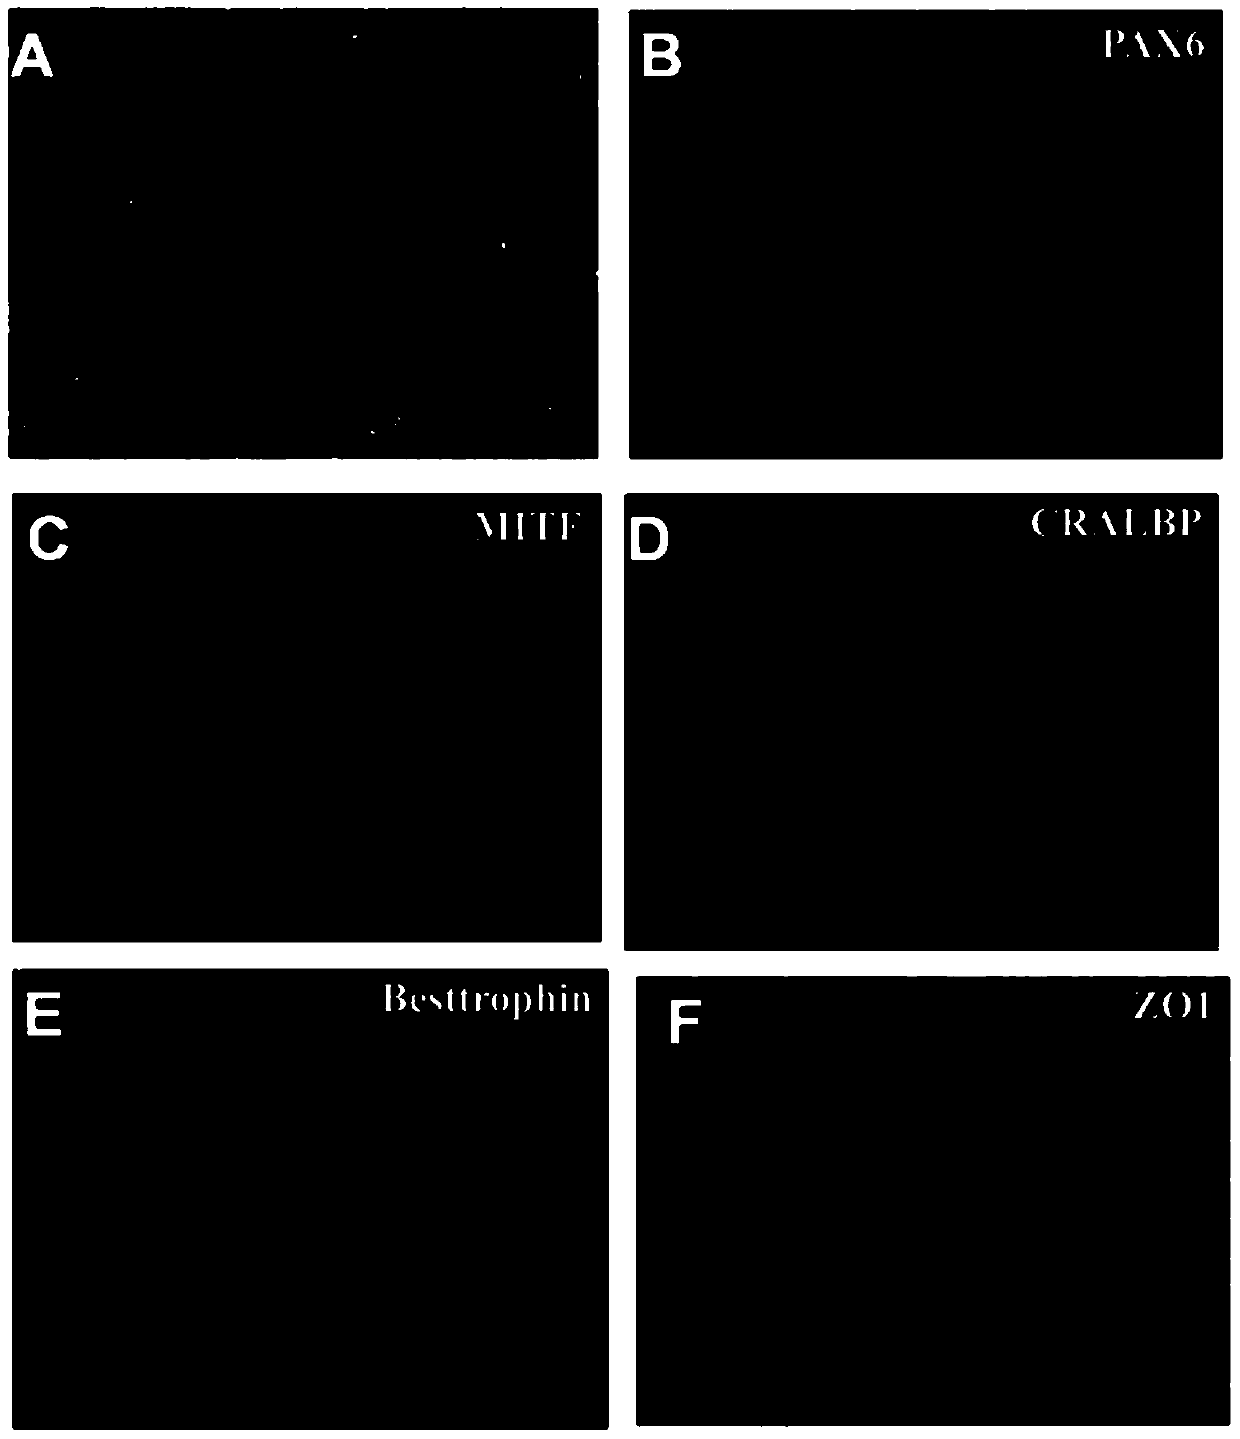 Method for inducing human embryonic stem cells to differentiate into retinal pigment epithelial cells in vitro